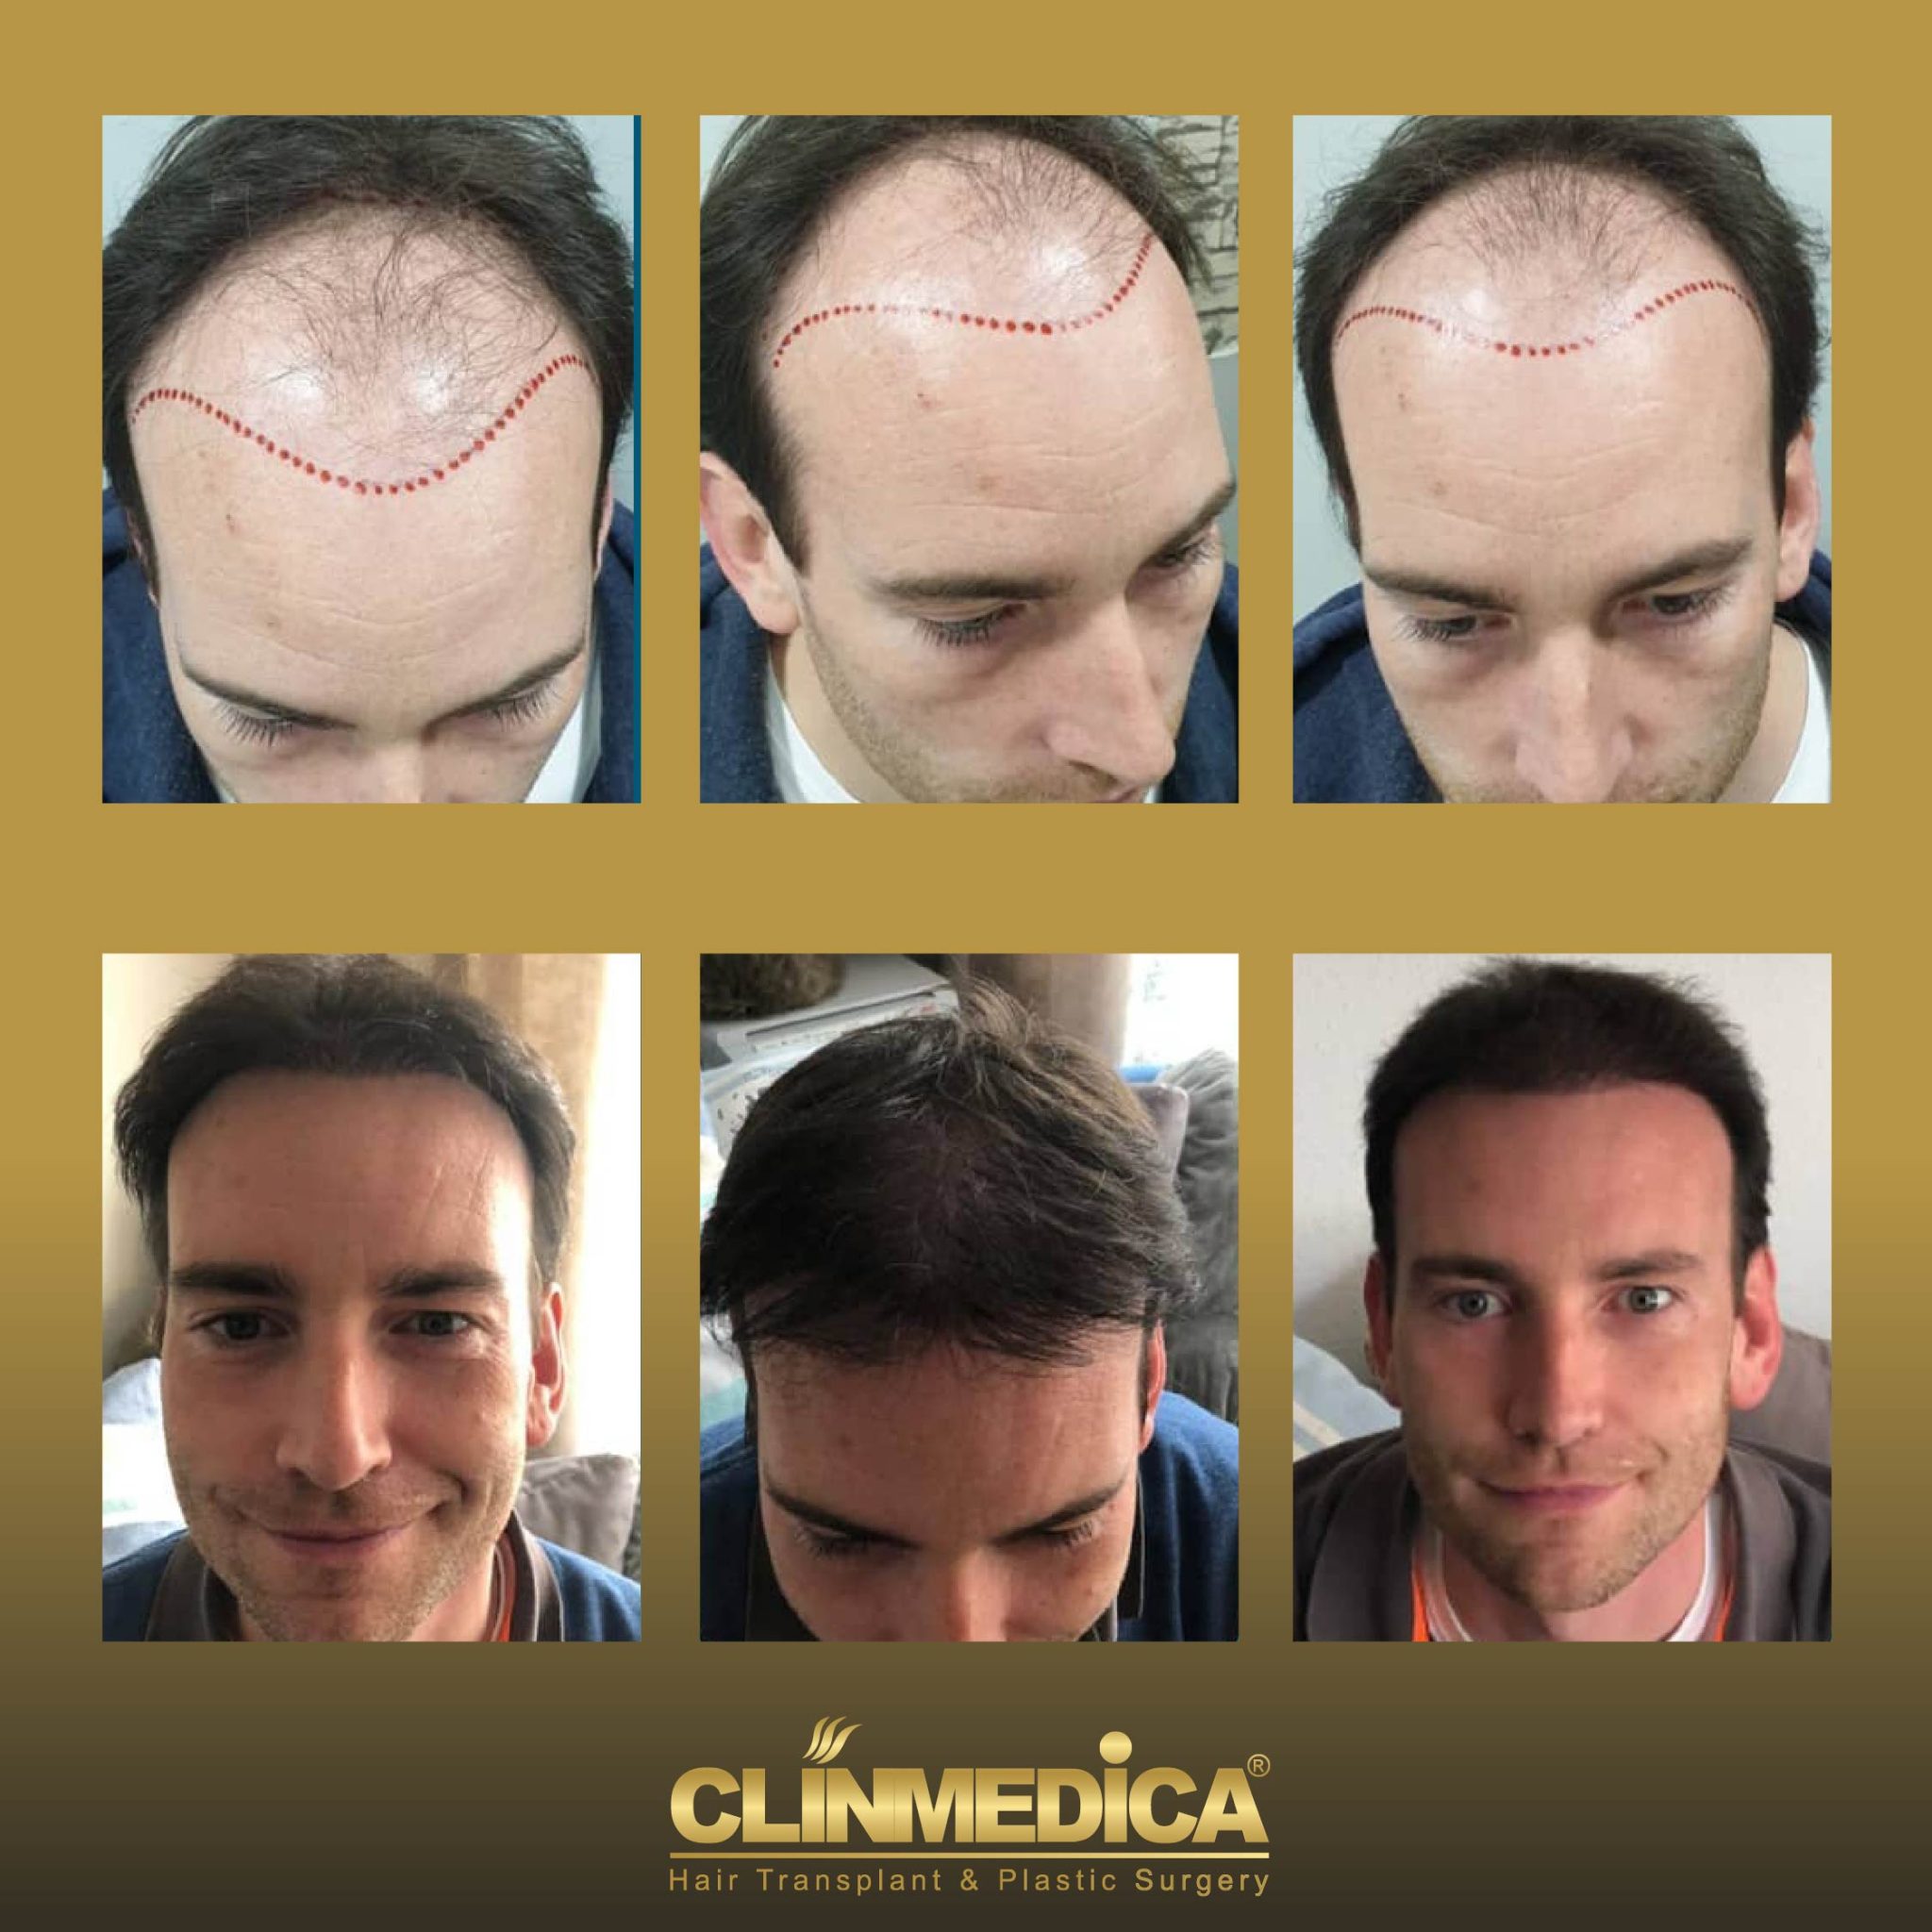 hair transplant before and after in Turkey